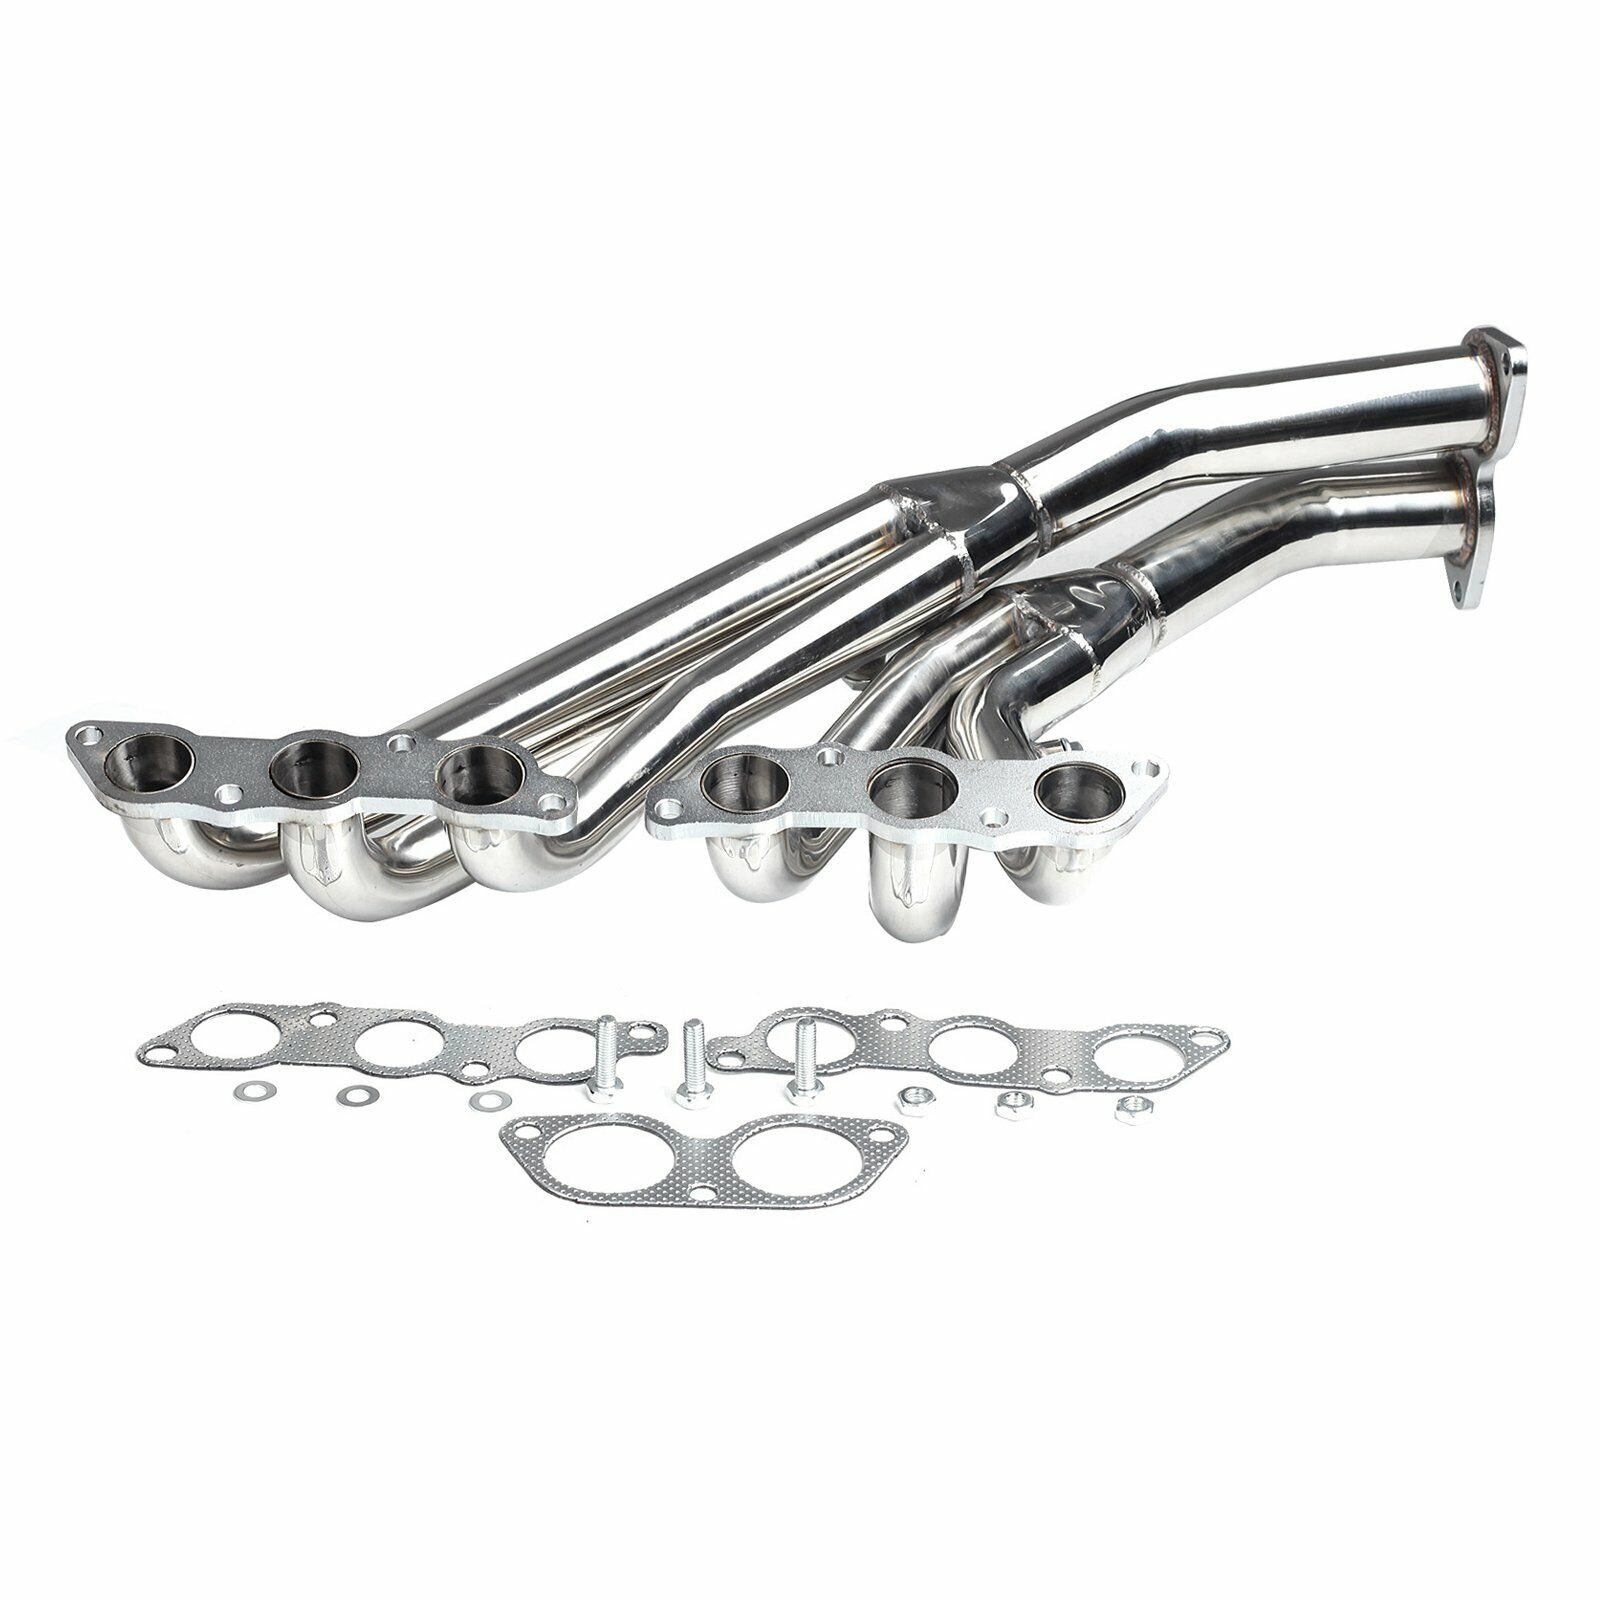 For 01-05 Altezza IS300 2JZGE XE10 2JZGE Stainless Steel Manifold Header/Exhaust